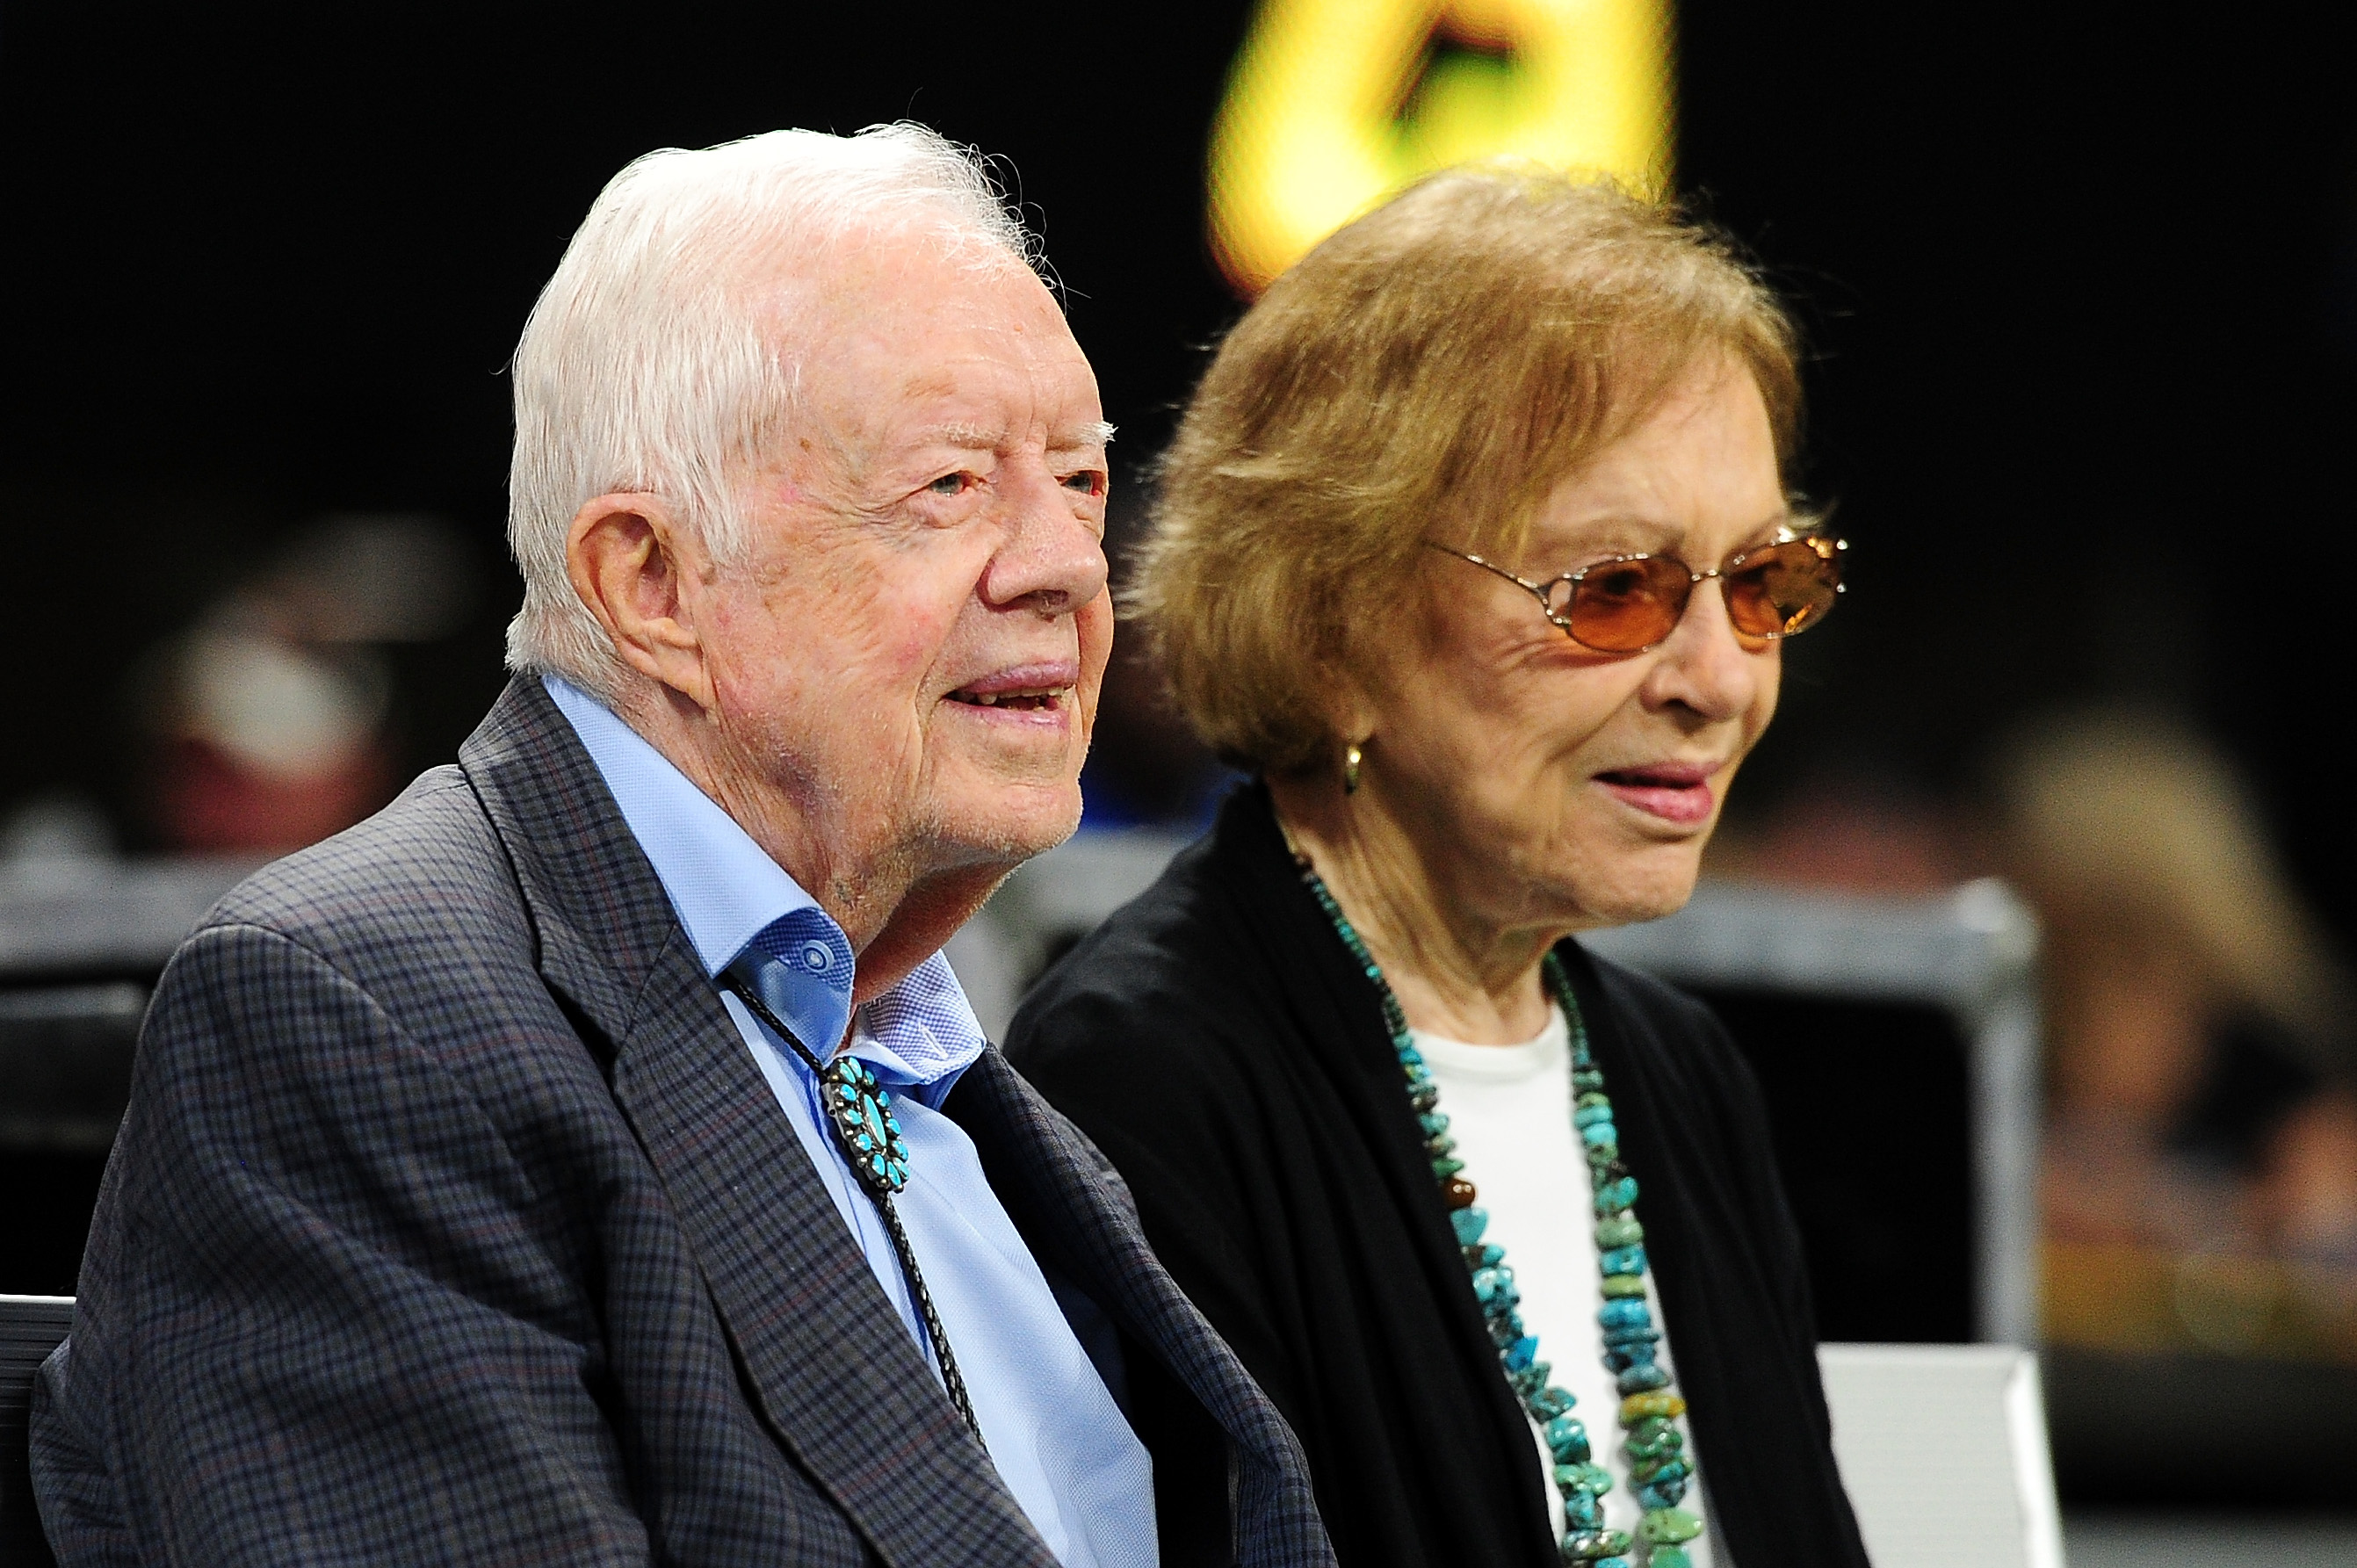 Former U.S. President Jimmy Carter and former U.S. First Lady Rosalynn Carter at a Cincinnati Bengals vs Atlanta Falcons game in Atlanta, Georgia on September 30, 2018 | Source: Getty Images